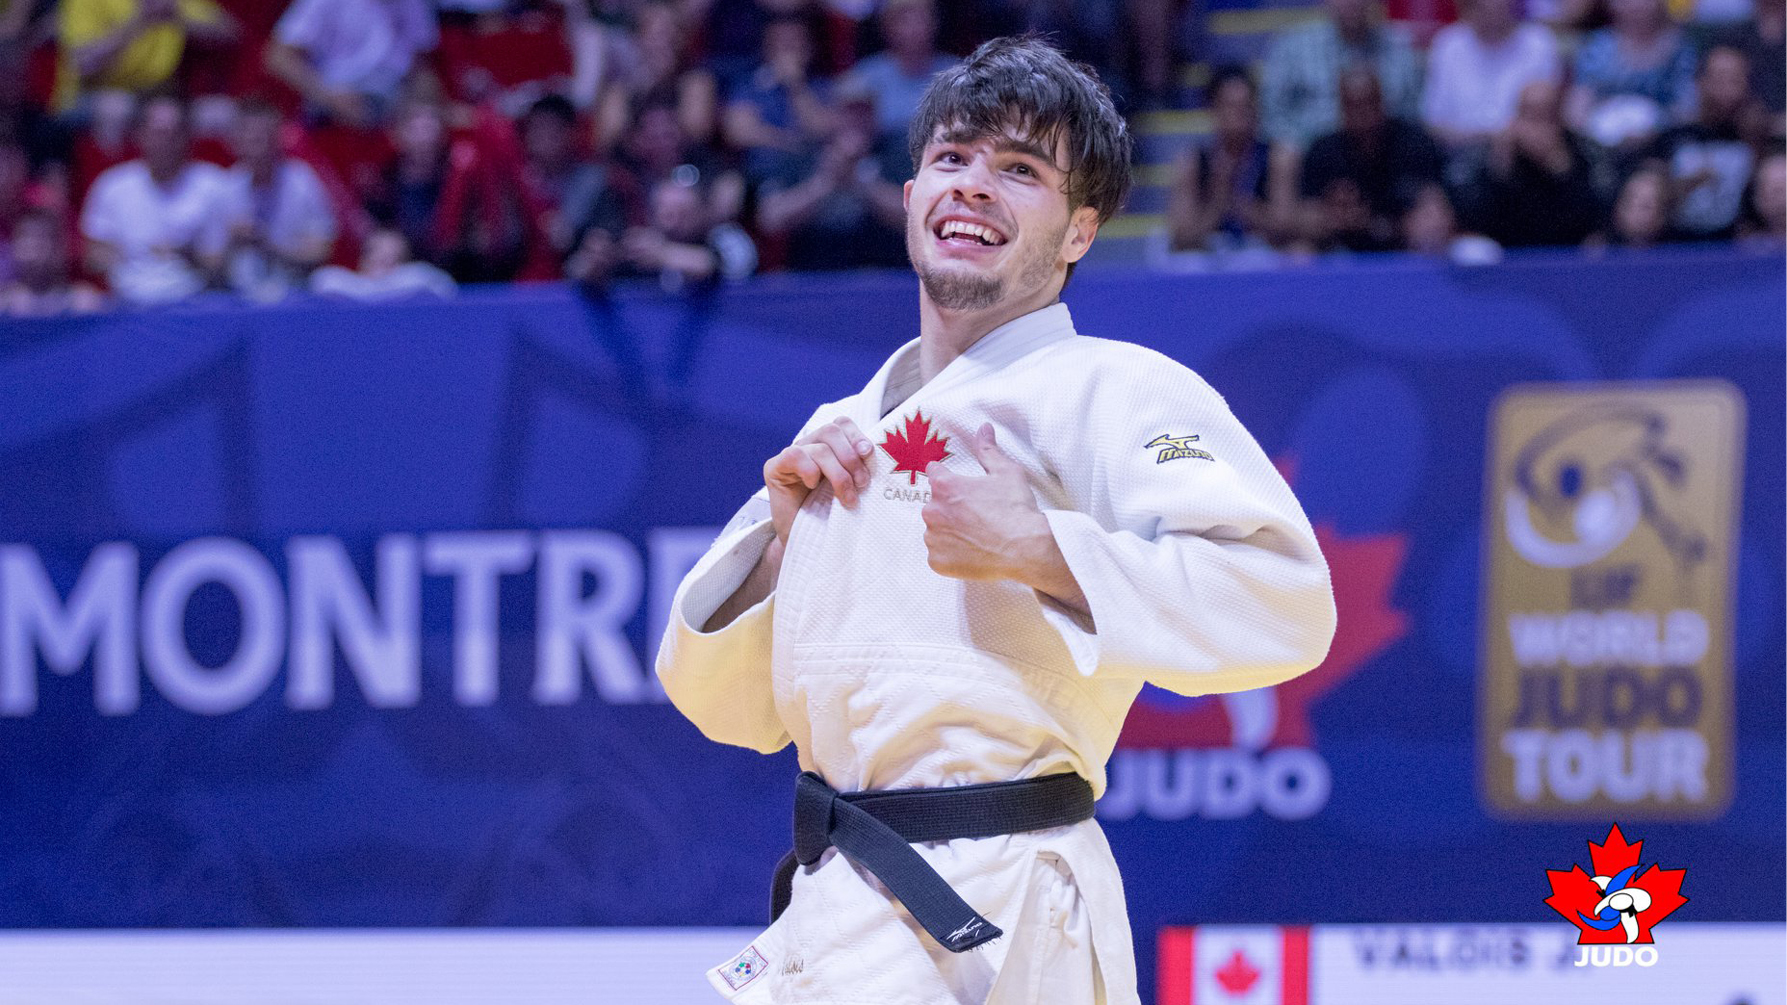 Seven athletes to represent Canada in judo at Lima 2019 - Team Canada